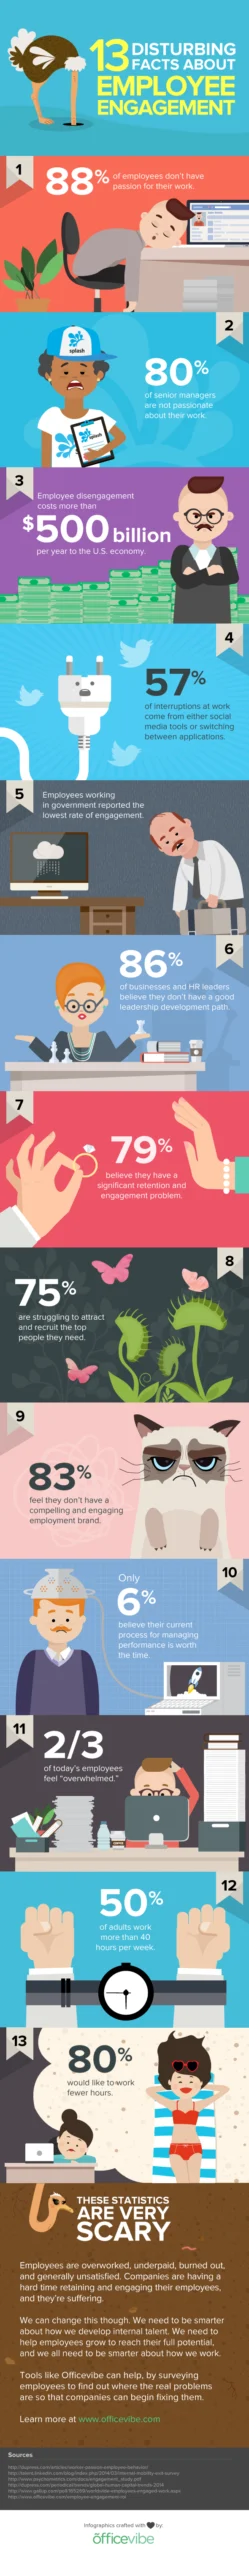 Disturbing Facts About 13 Employee Engagement